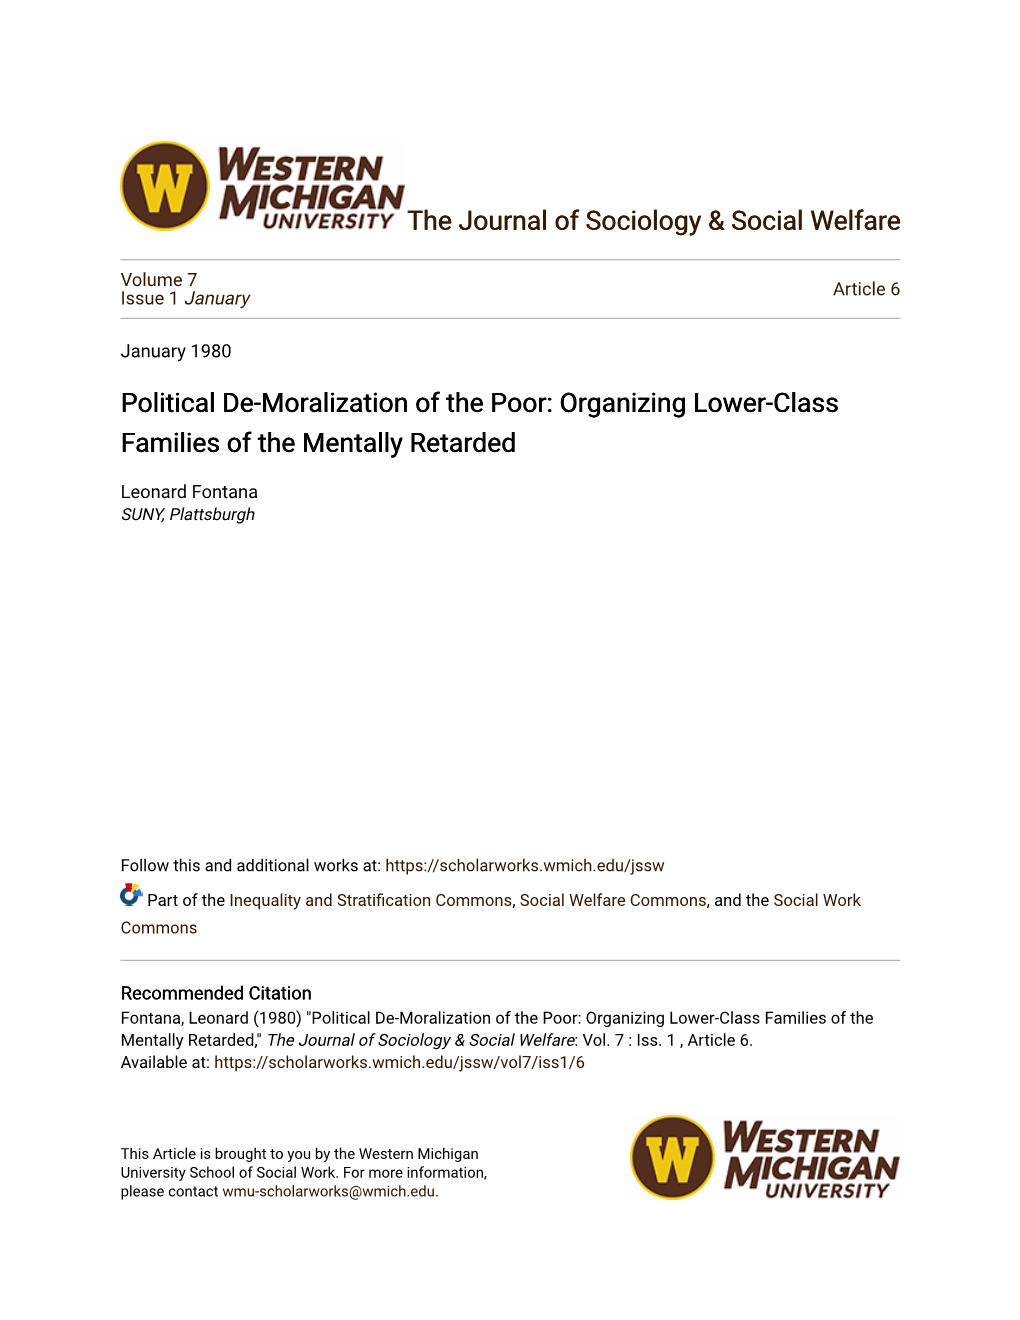 Political De-Moralization of the Poor: Organizing Lower-Class Families of the Mentally Retarded